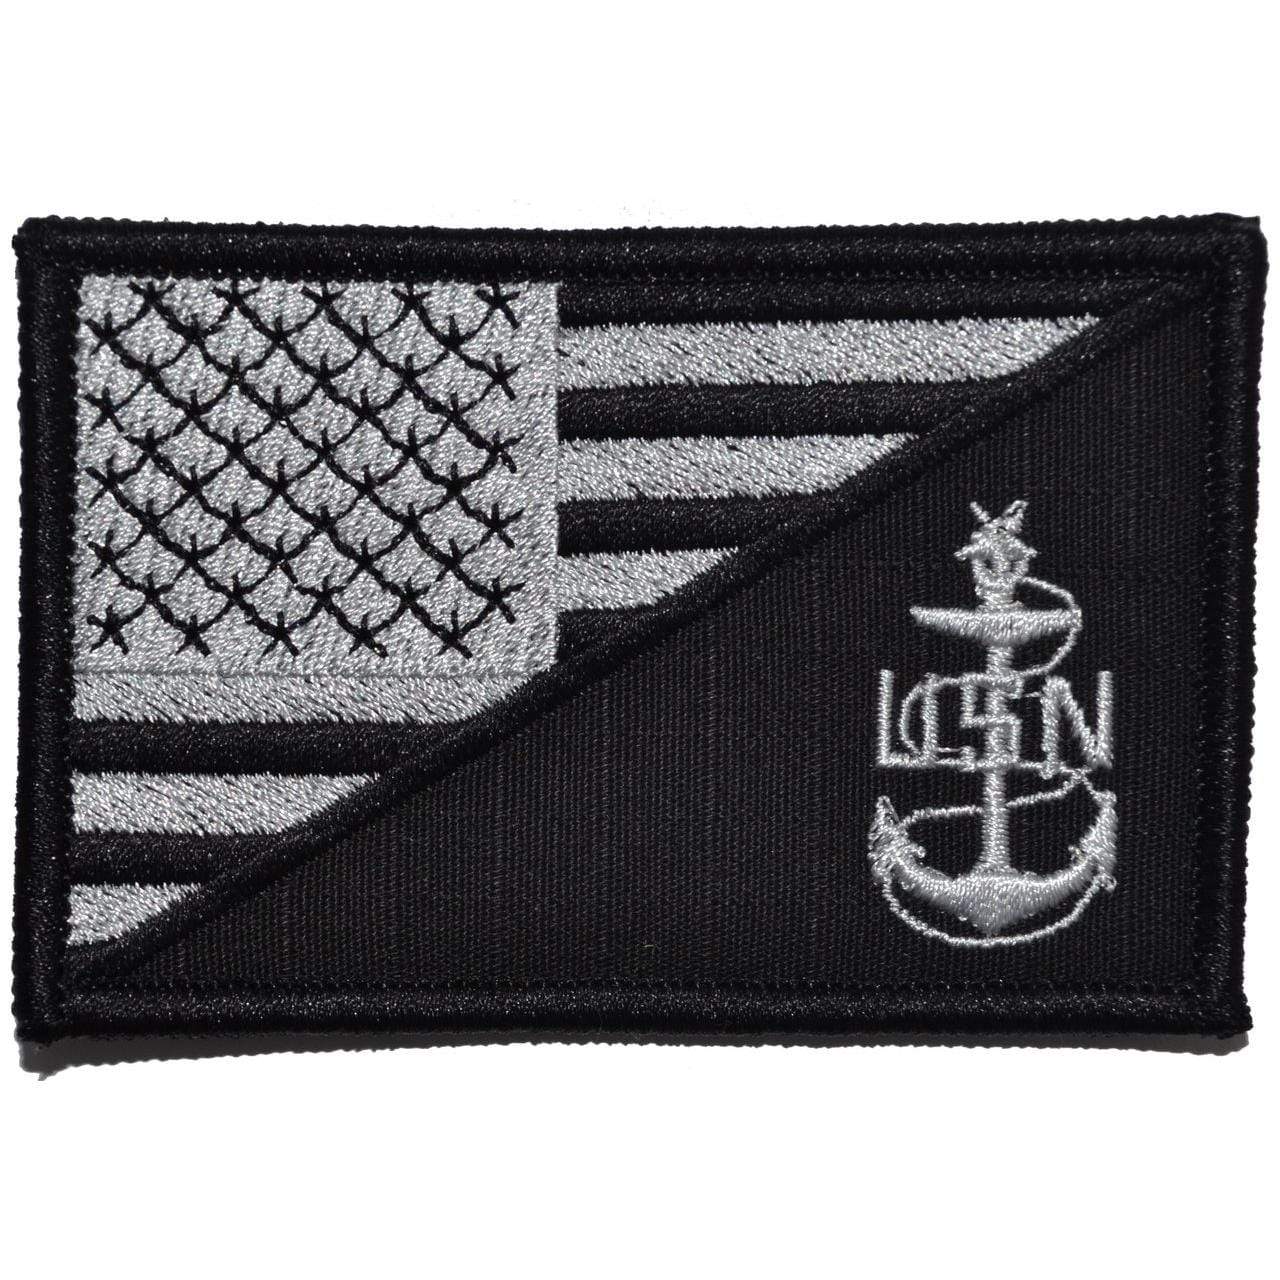 Tactical Gear Junkie Patches Black Navy SCPO Senior Chief Petty Officer USA Flag - 2.25x3.5 Patch